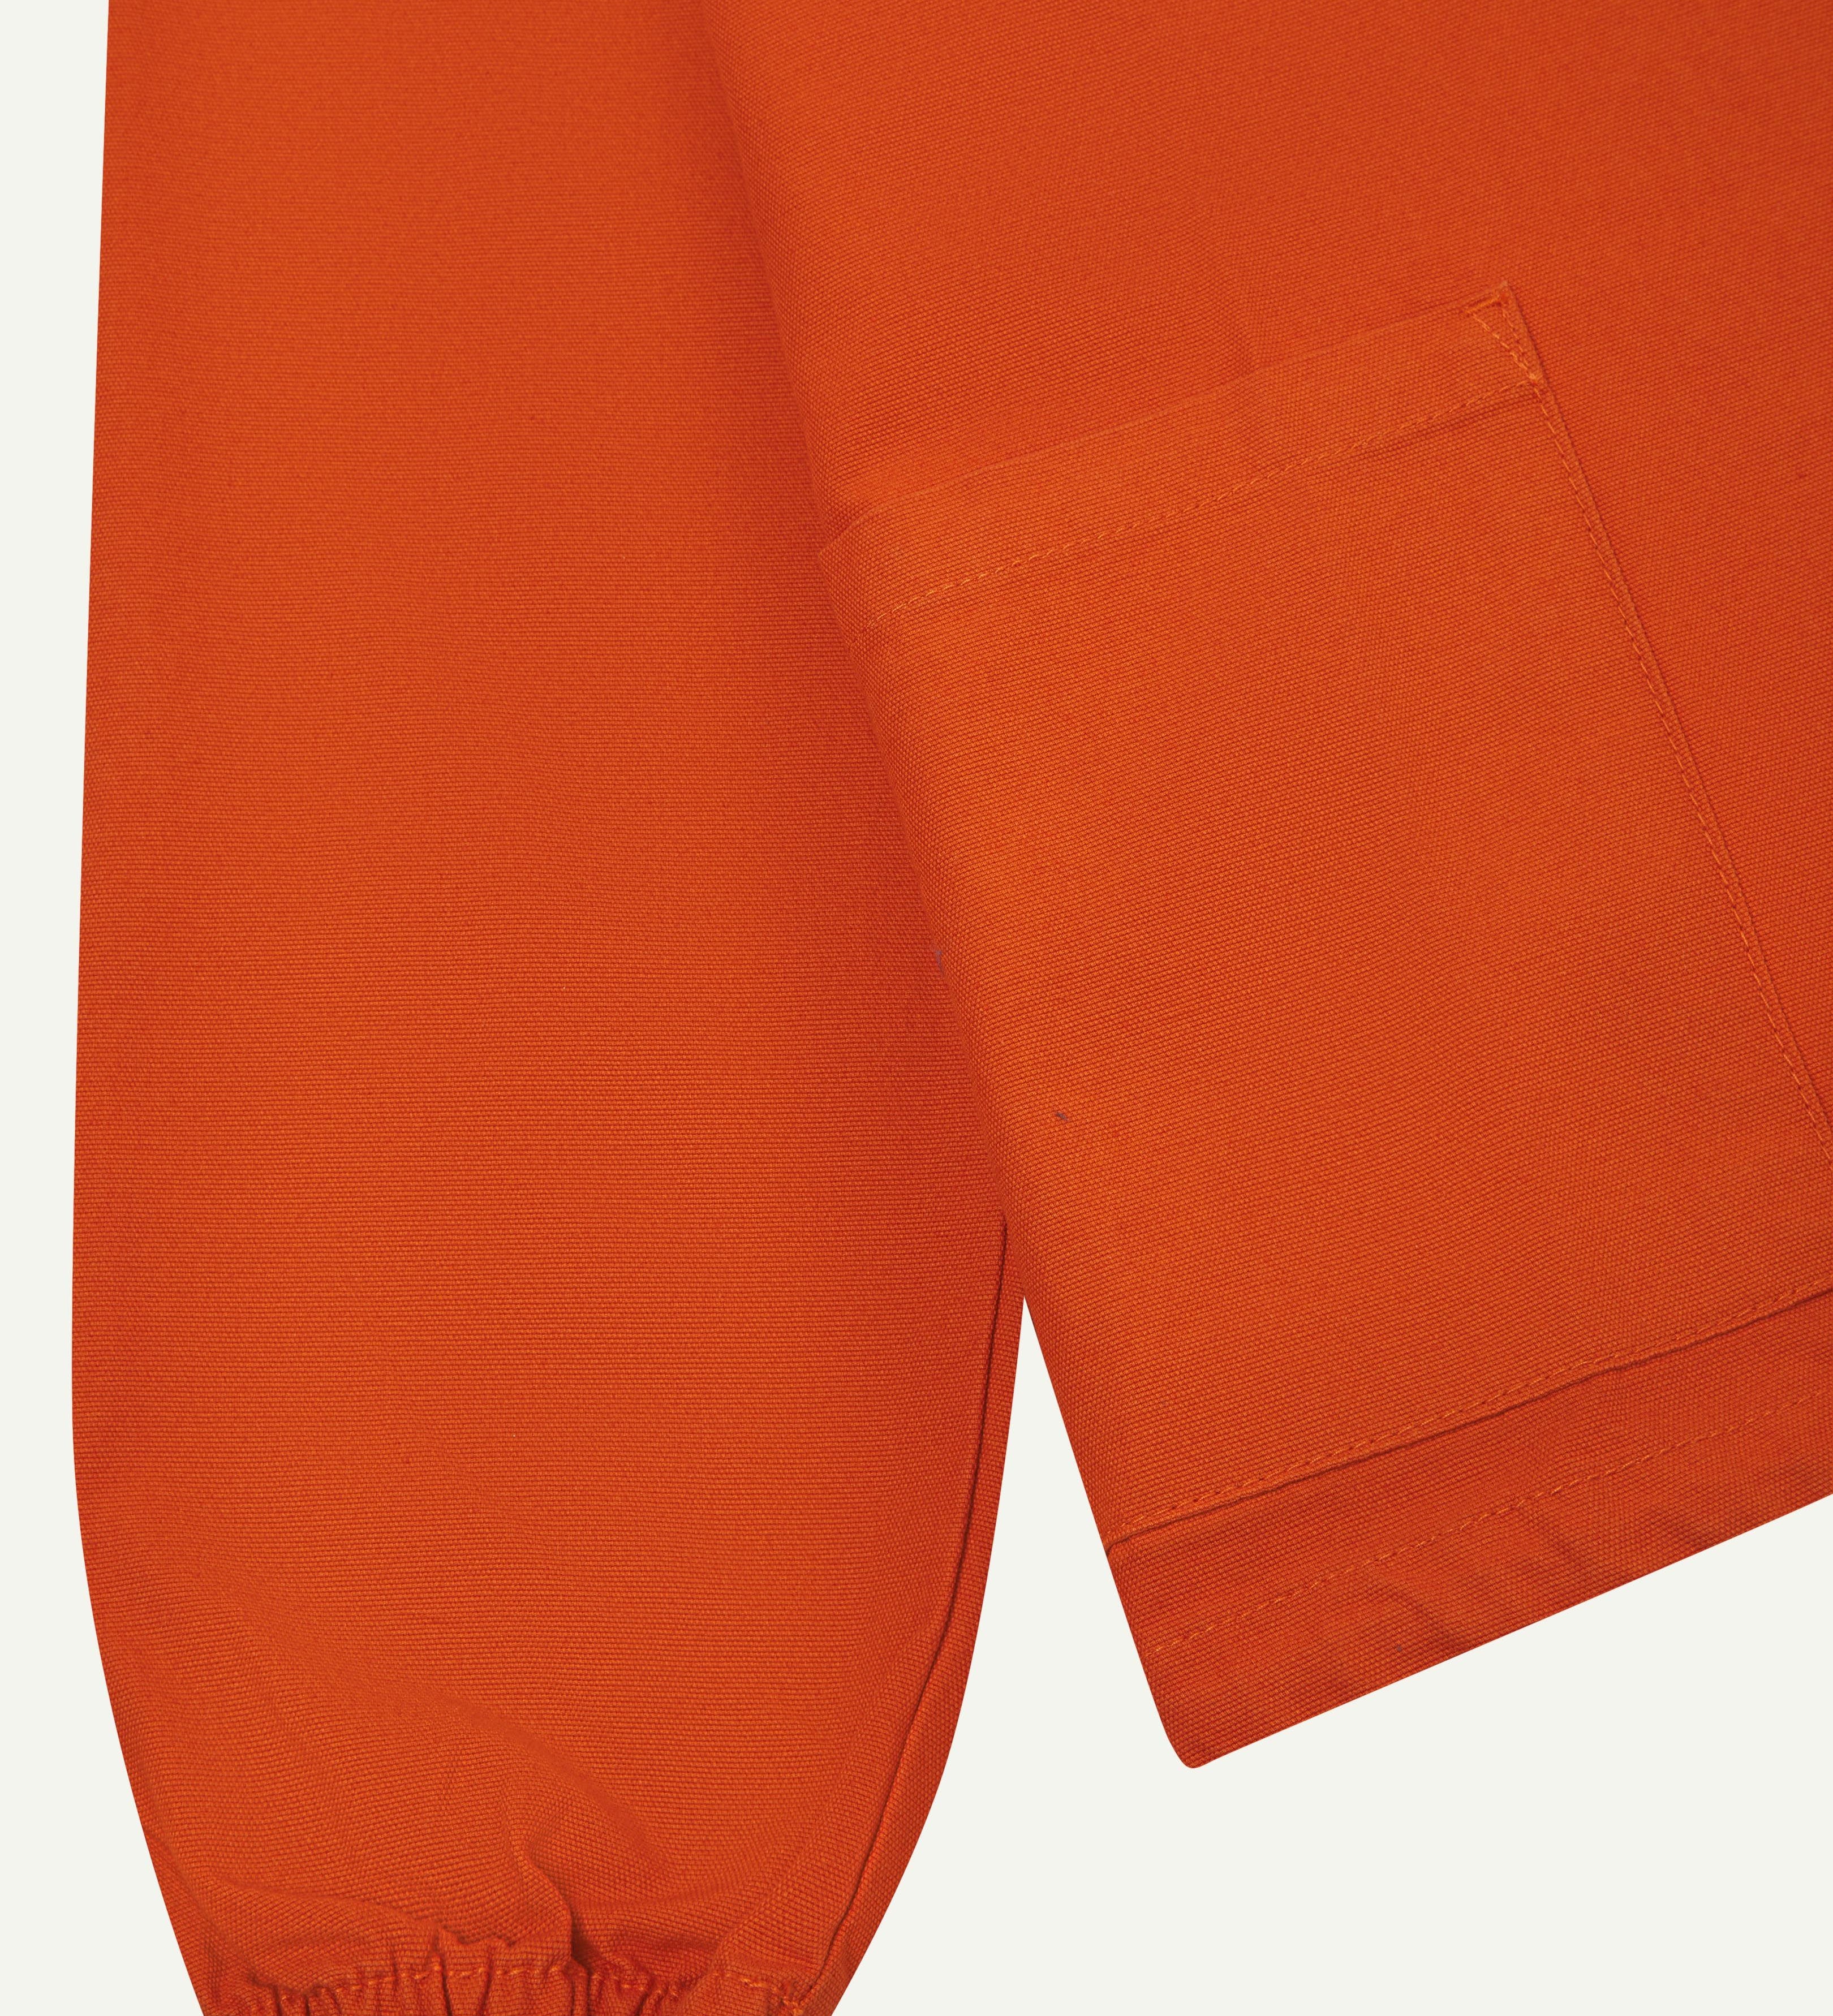 Close-up view of  sleeve and front pocket - 'gold' coloured smock from Uskees